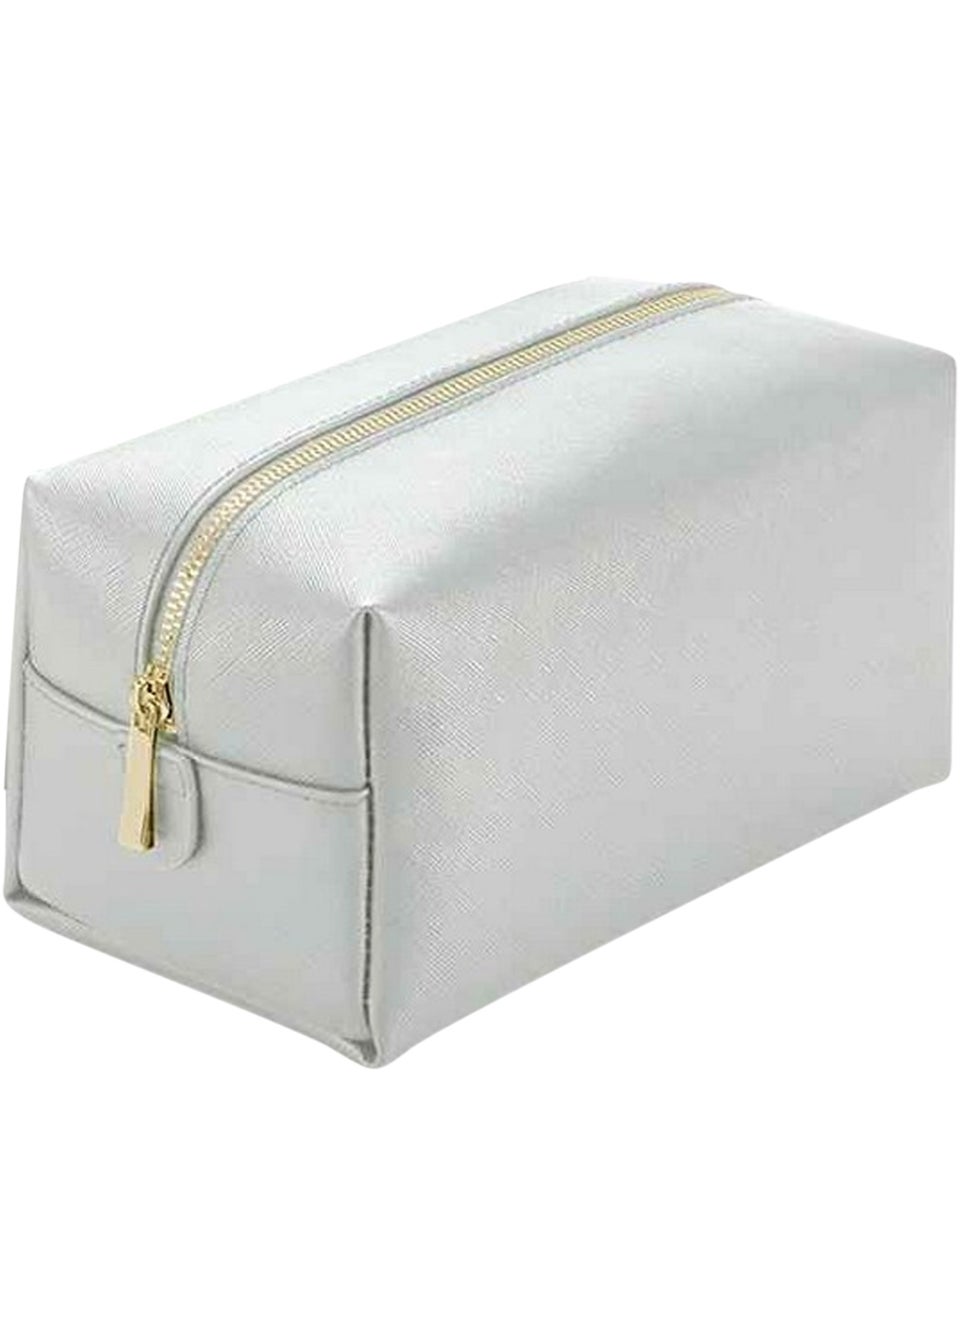 Bagbase Grey Boutique Toiletry Bag